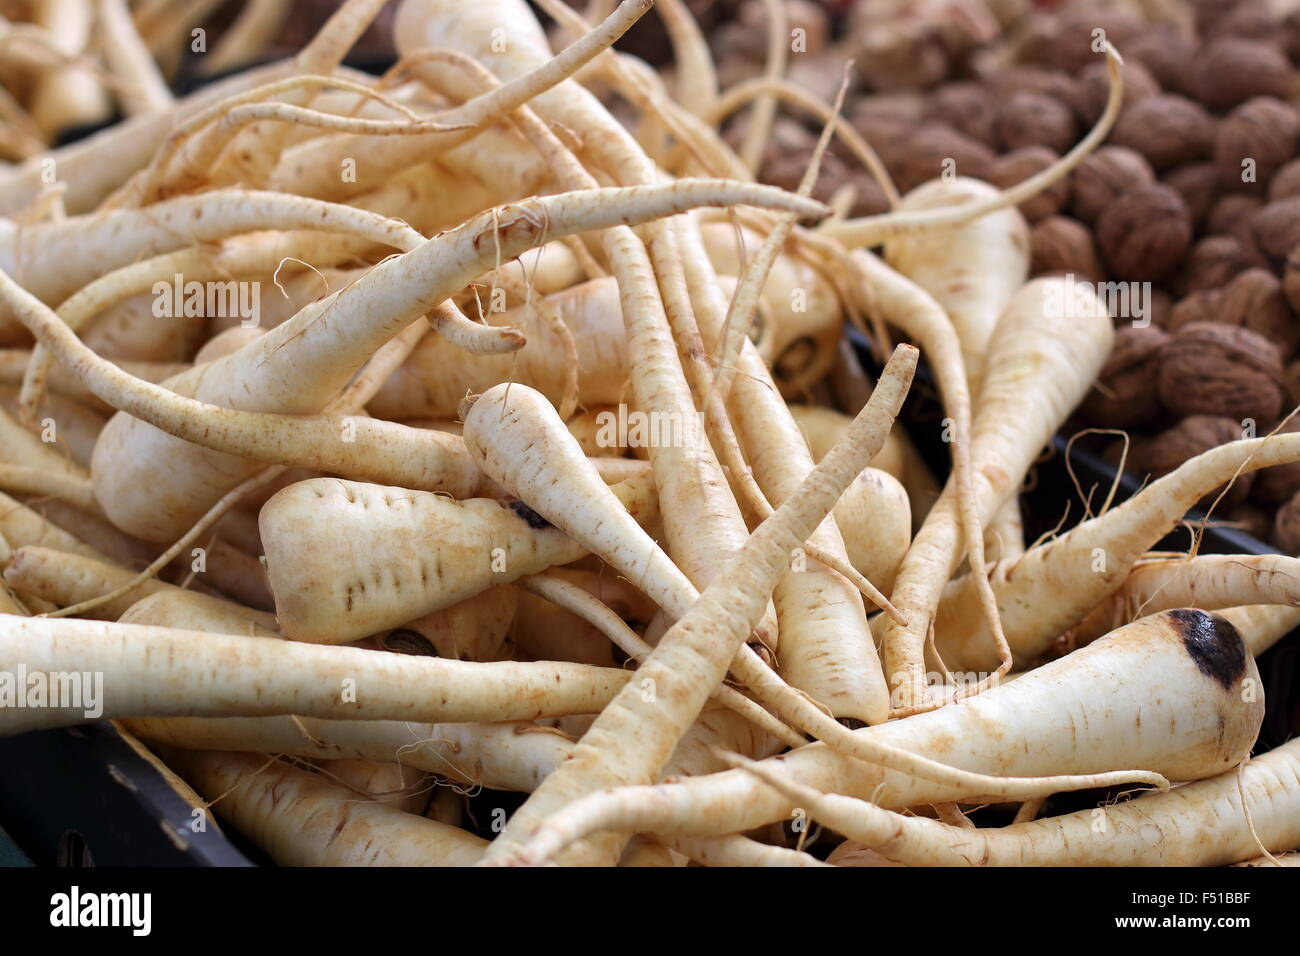 Fresh parsnip being sold at market Stock Photo